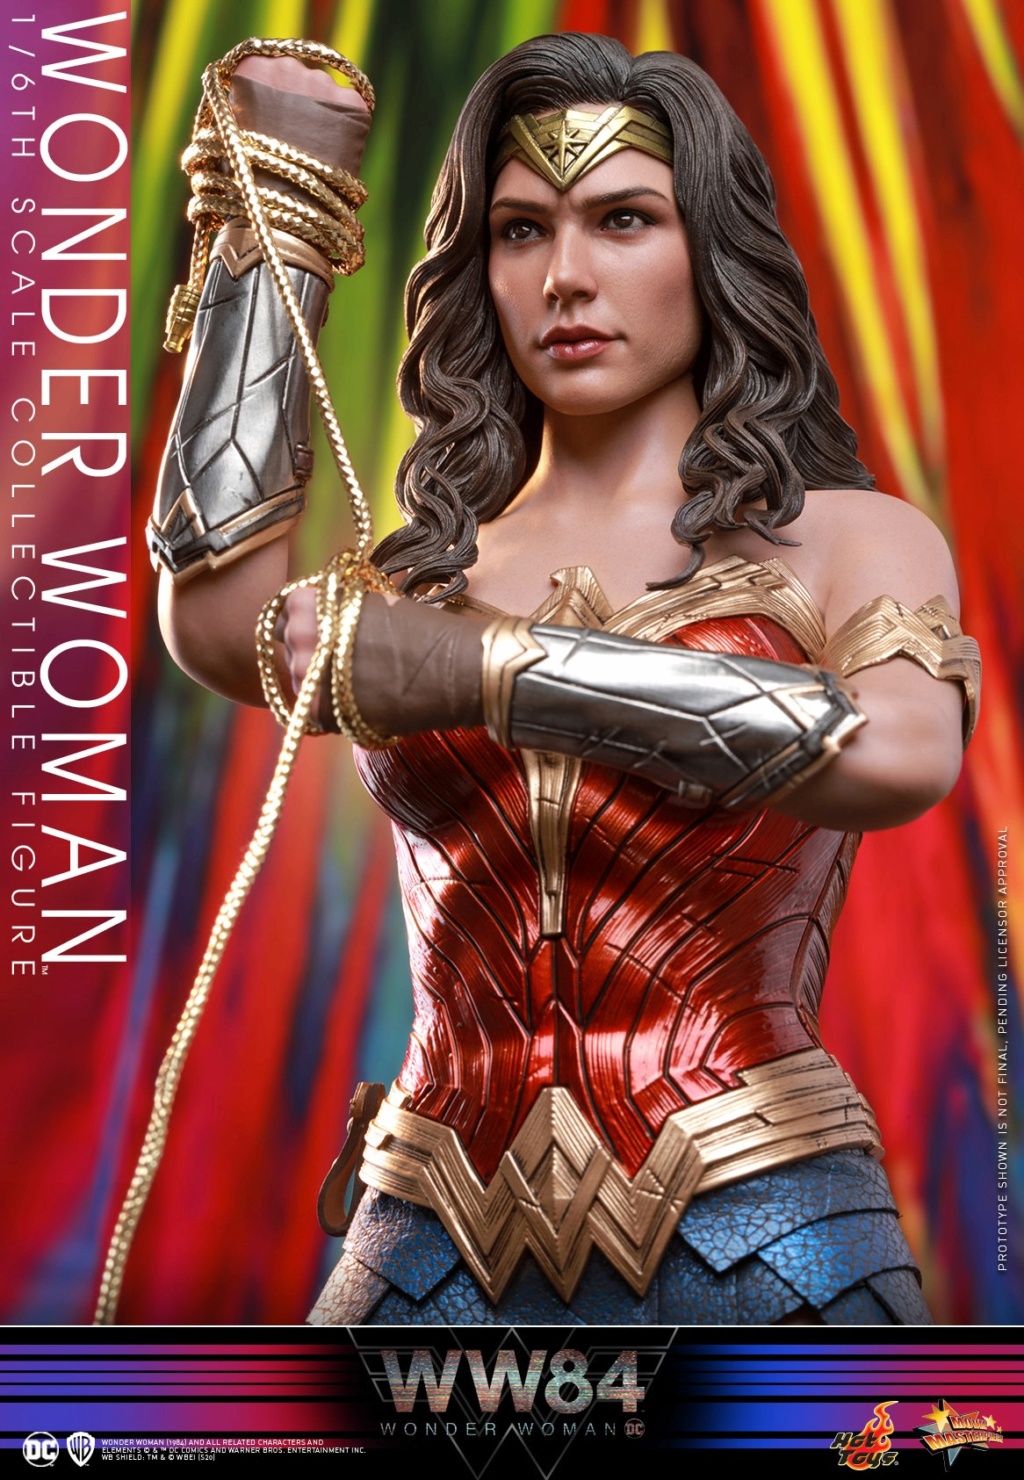 1984 - NEW PRODUCT: HOT TOYS: WONDER WOMAN 1984 WONDER WOMAN 1/6TH SCALE COLLECTIBLE FIGURE 10284